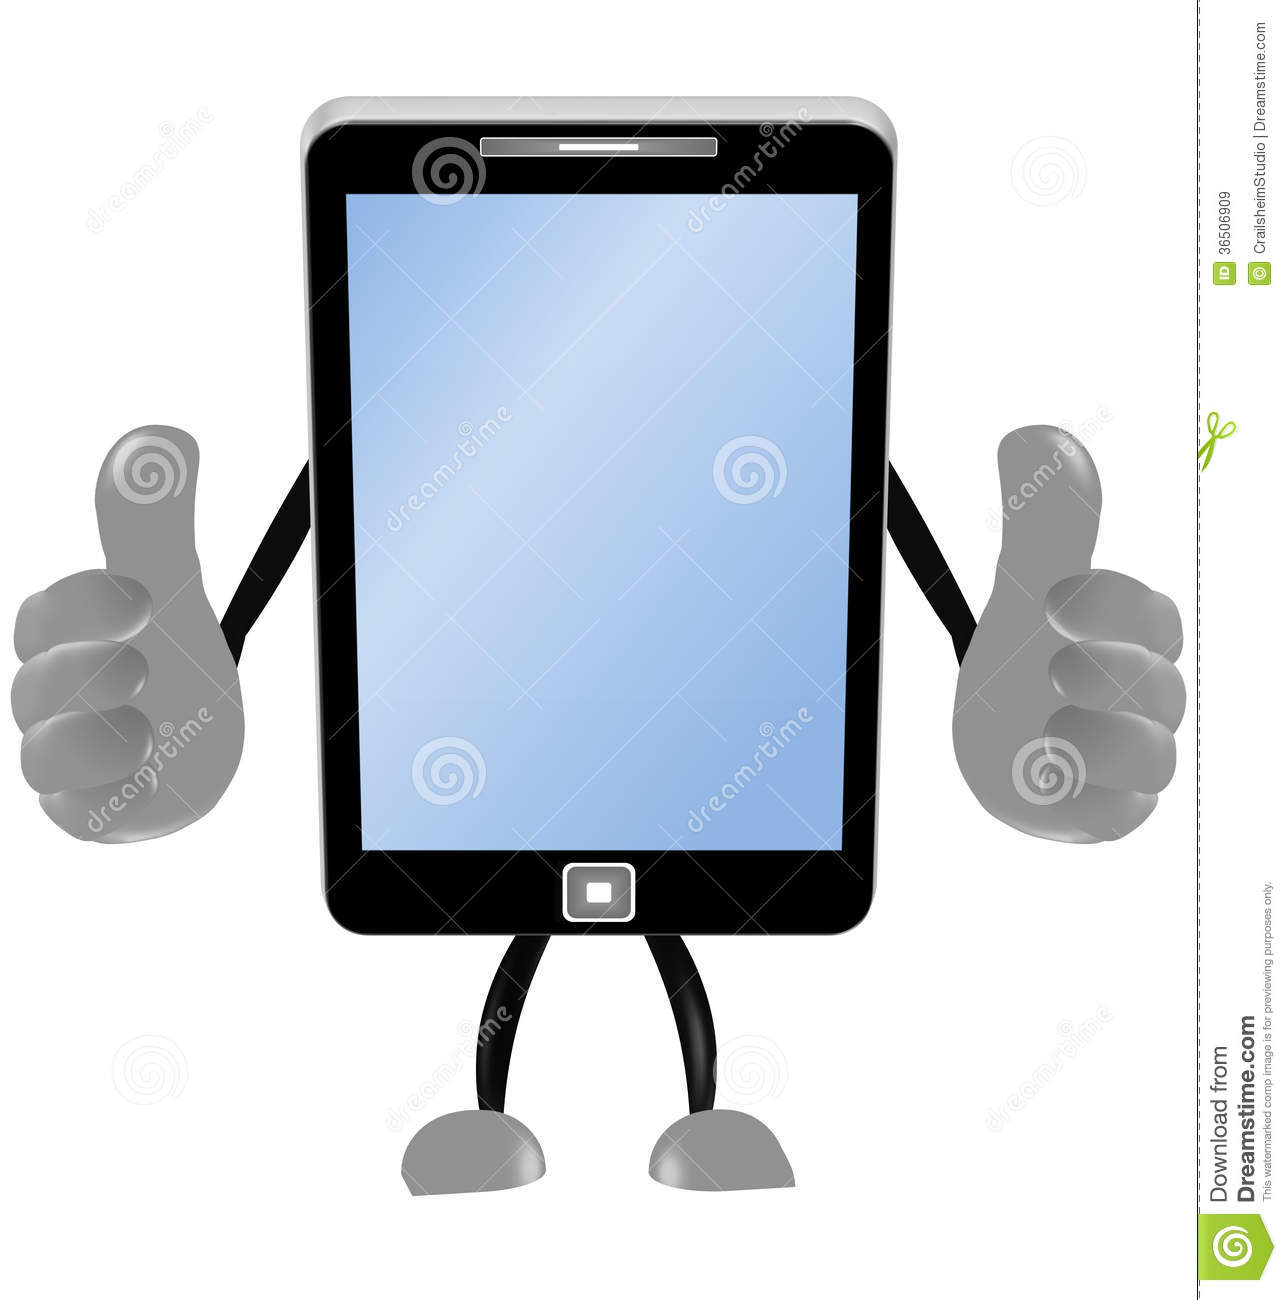 Smartphone 3d Thumbs Up Royalty Free Stock Images   Image  36506909